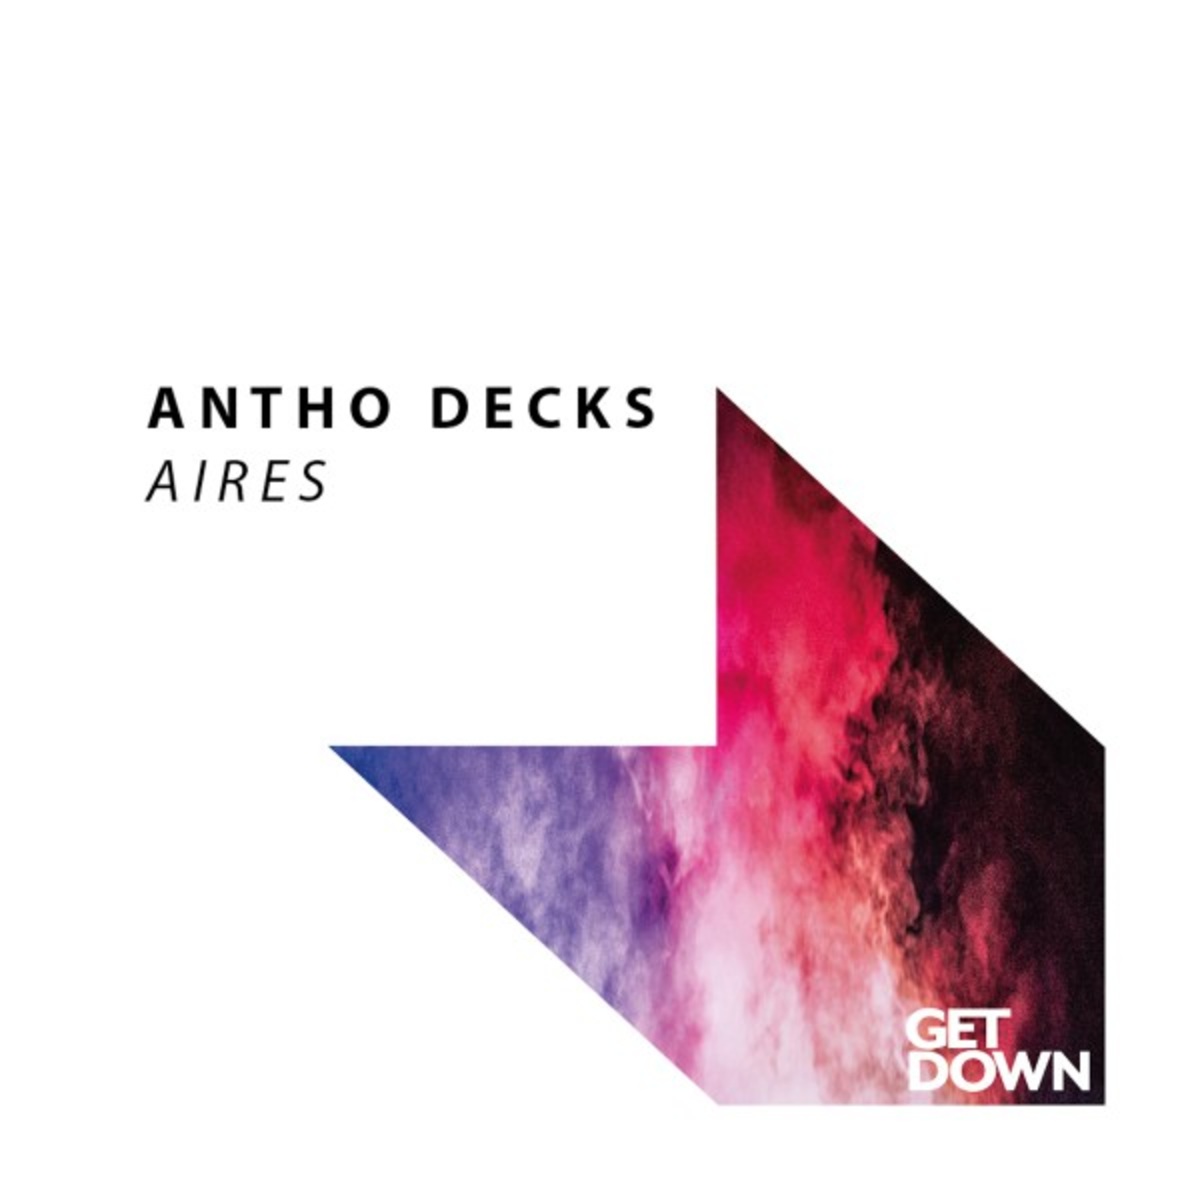 Antho Decks - Aires / Get Down Recordings